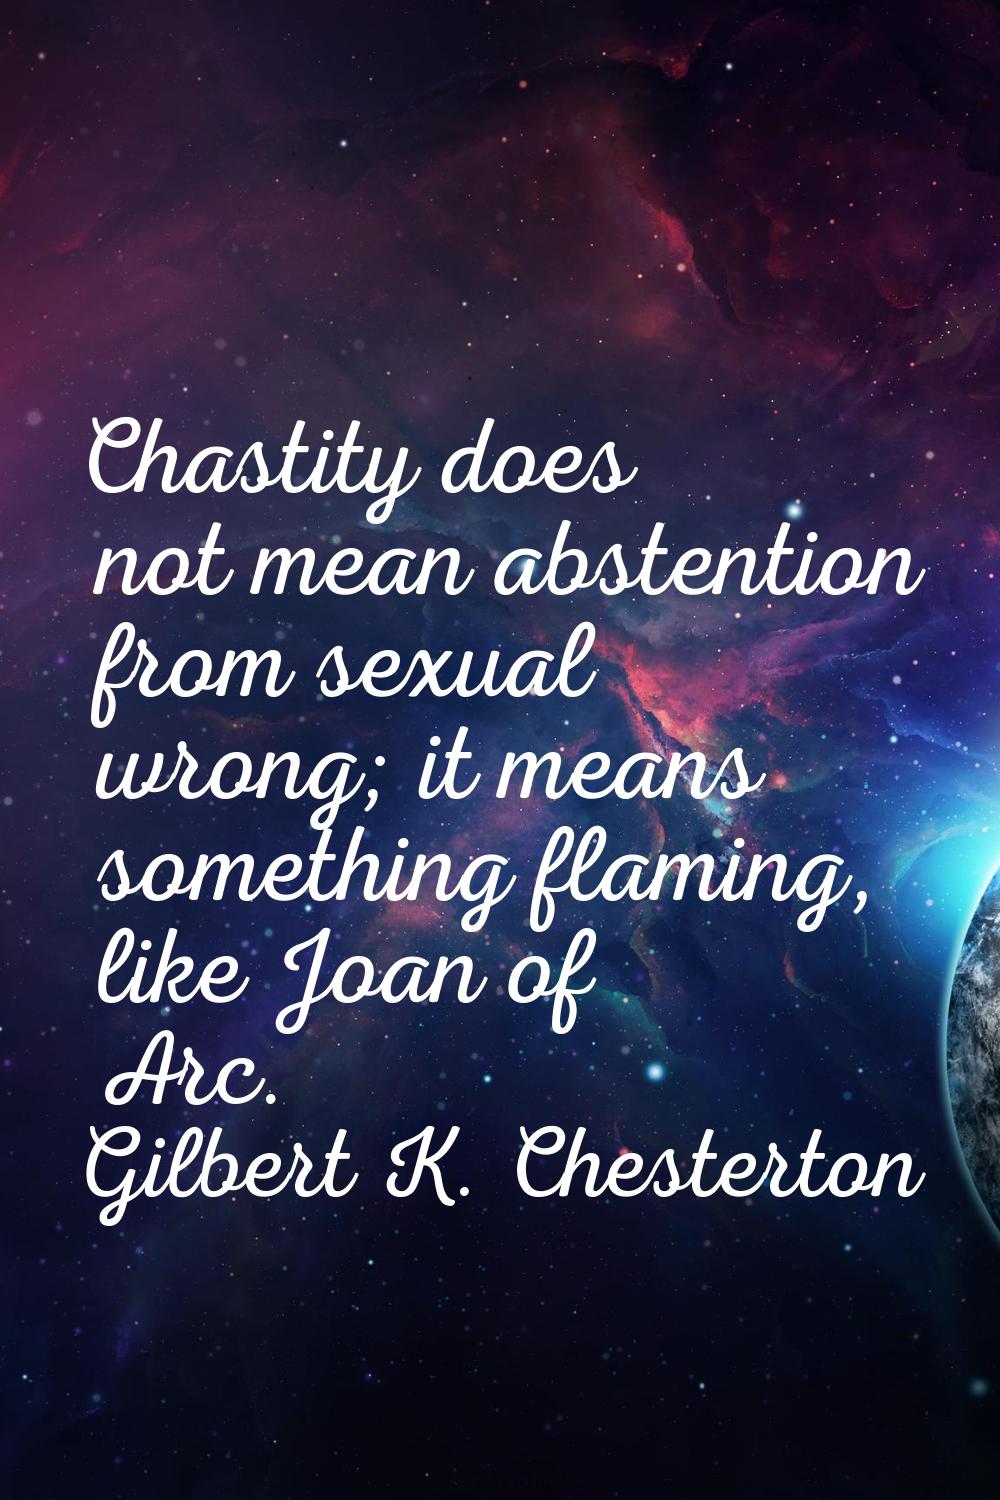 Chastity does not mean abstention from sexual wrong; it means something flaming, like Joan of Arc.